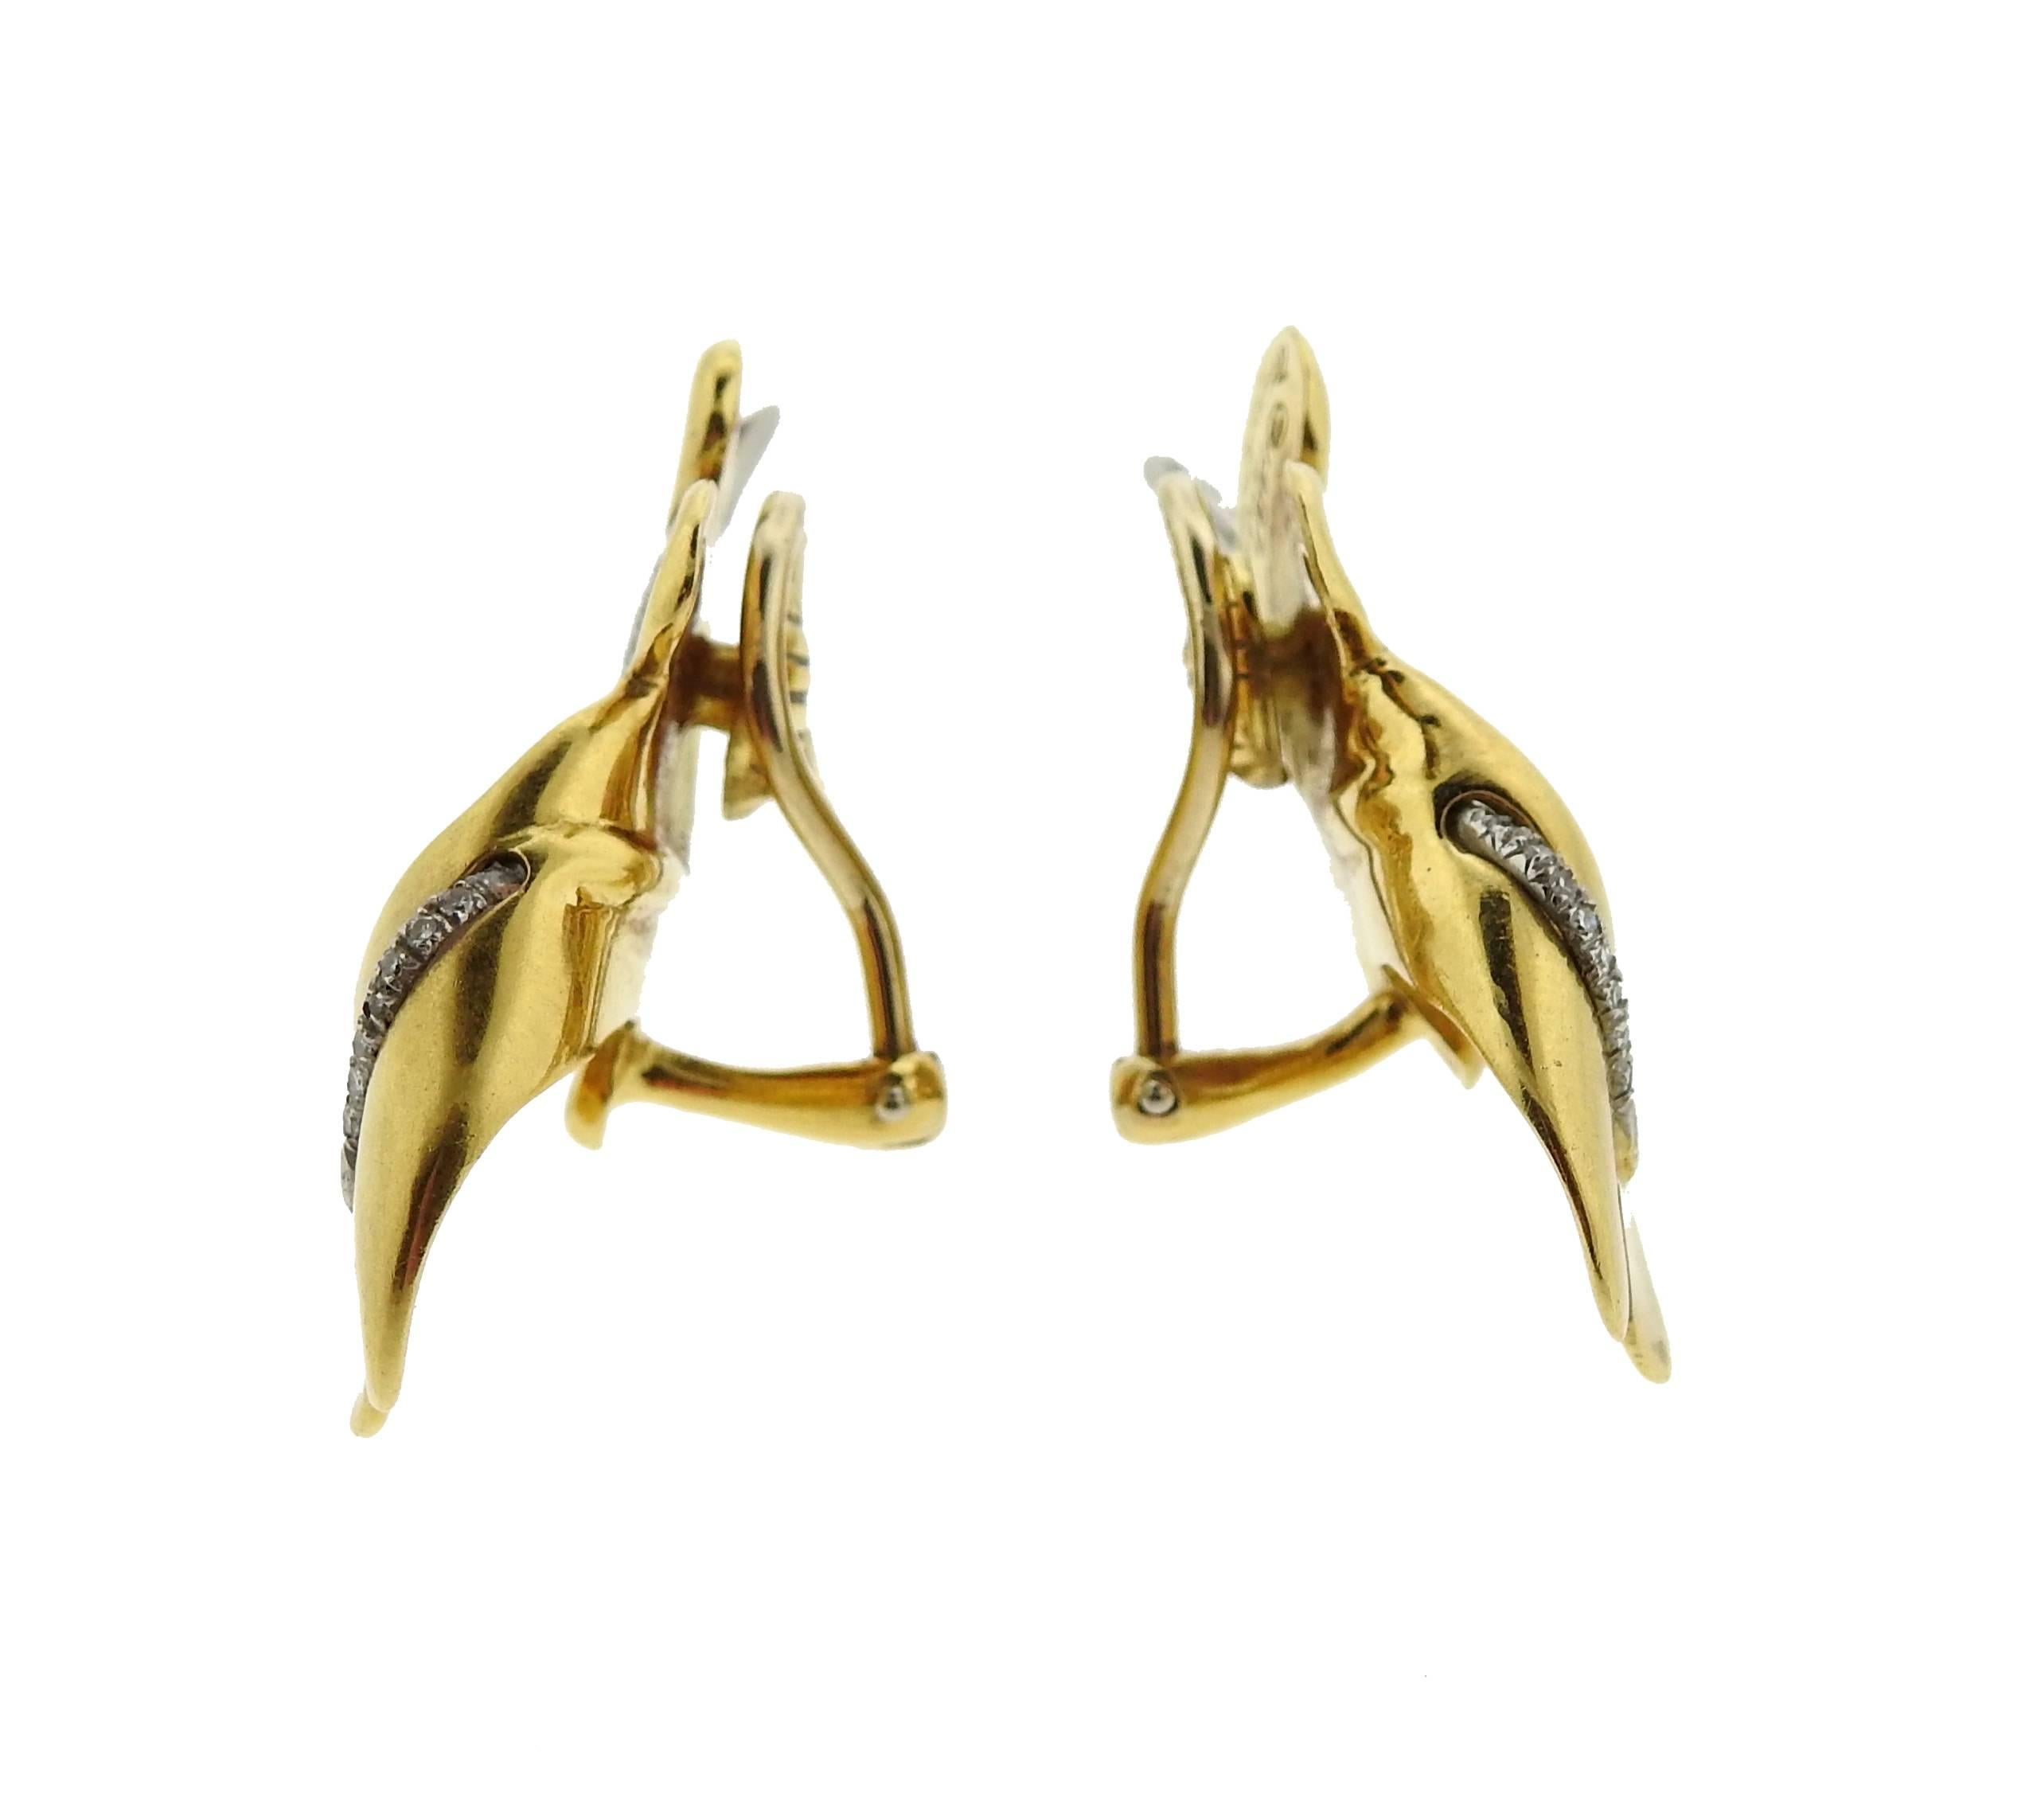 18k gold and platinum leaf earrings, crafted by Tiffany & Co in circa 1987. Earrings measure 40mm x 21mm, with diamond accents. Marked: 1987, 18k plat, Tiffany & Co . Weight: 20.4 grams 